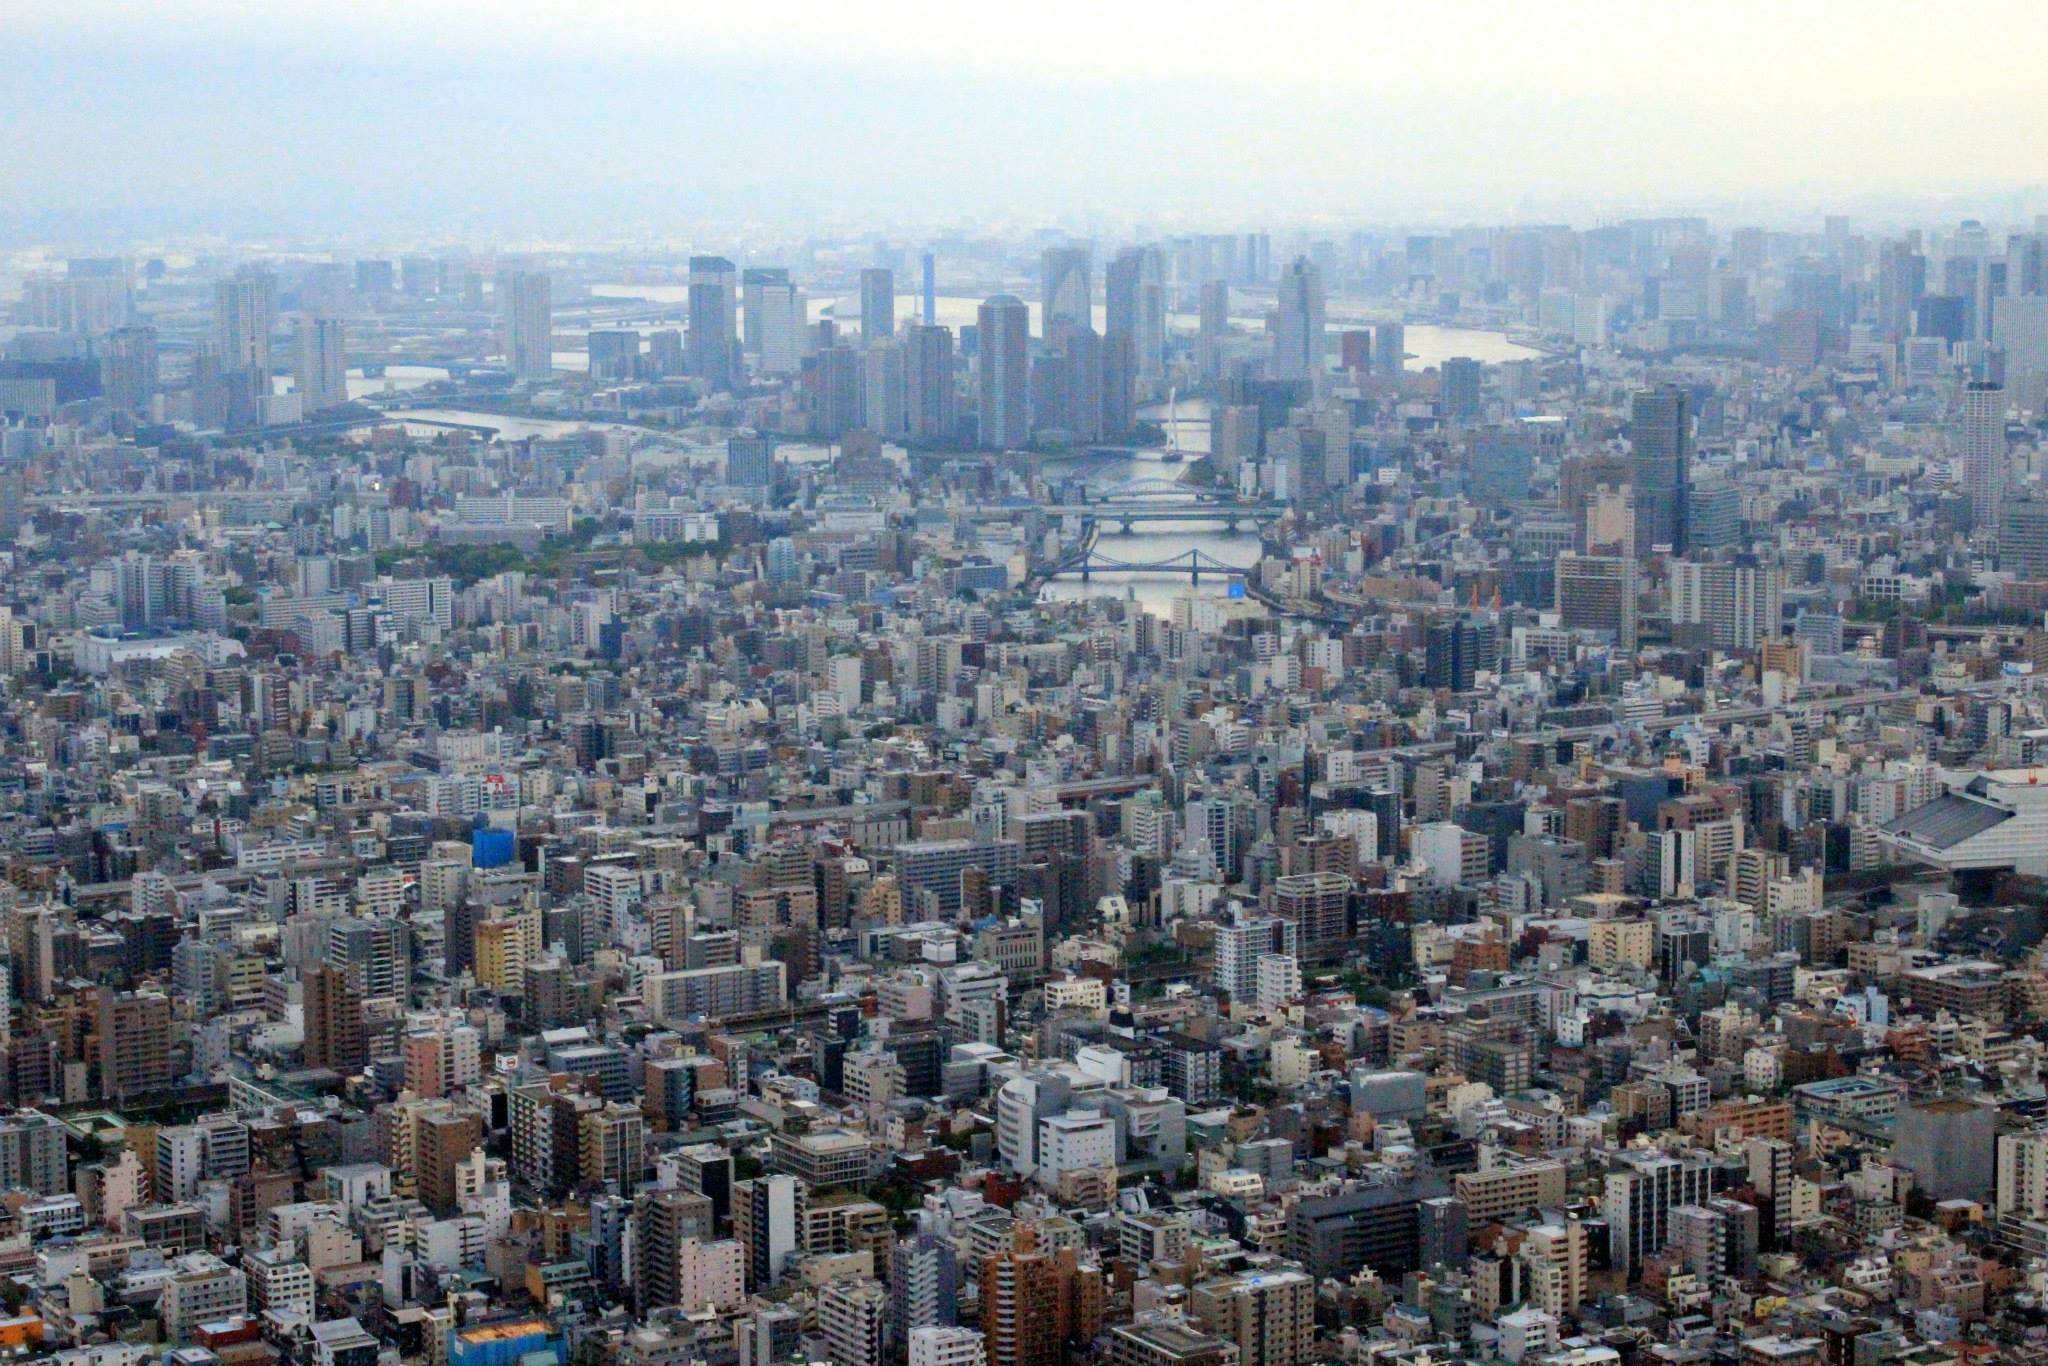 Tokyo as seen from Skytree